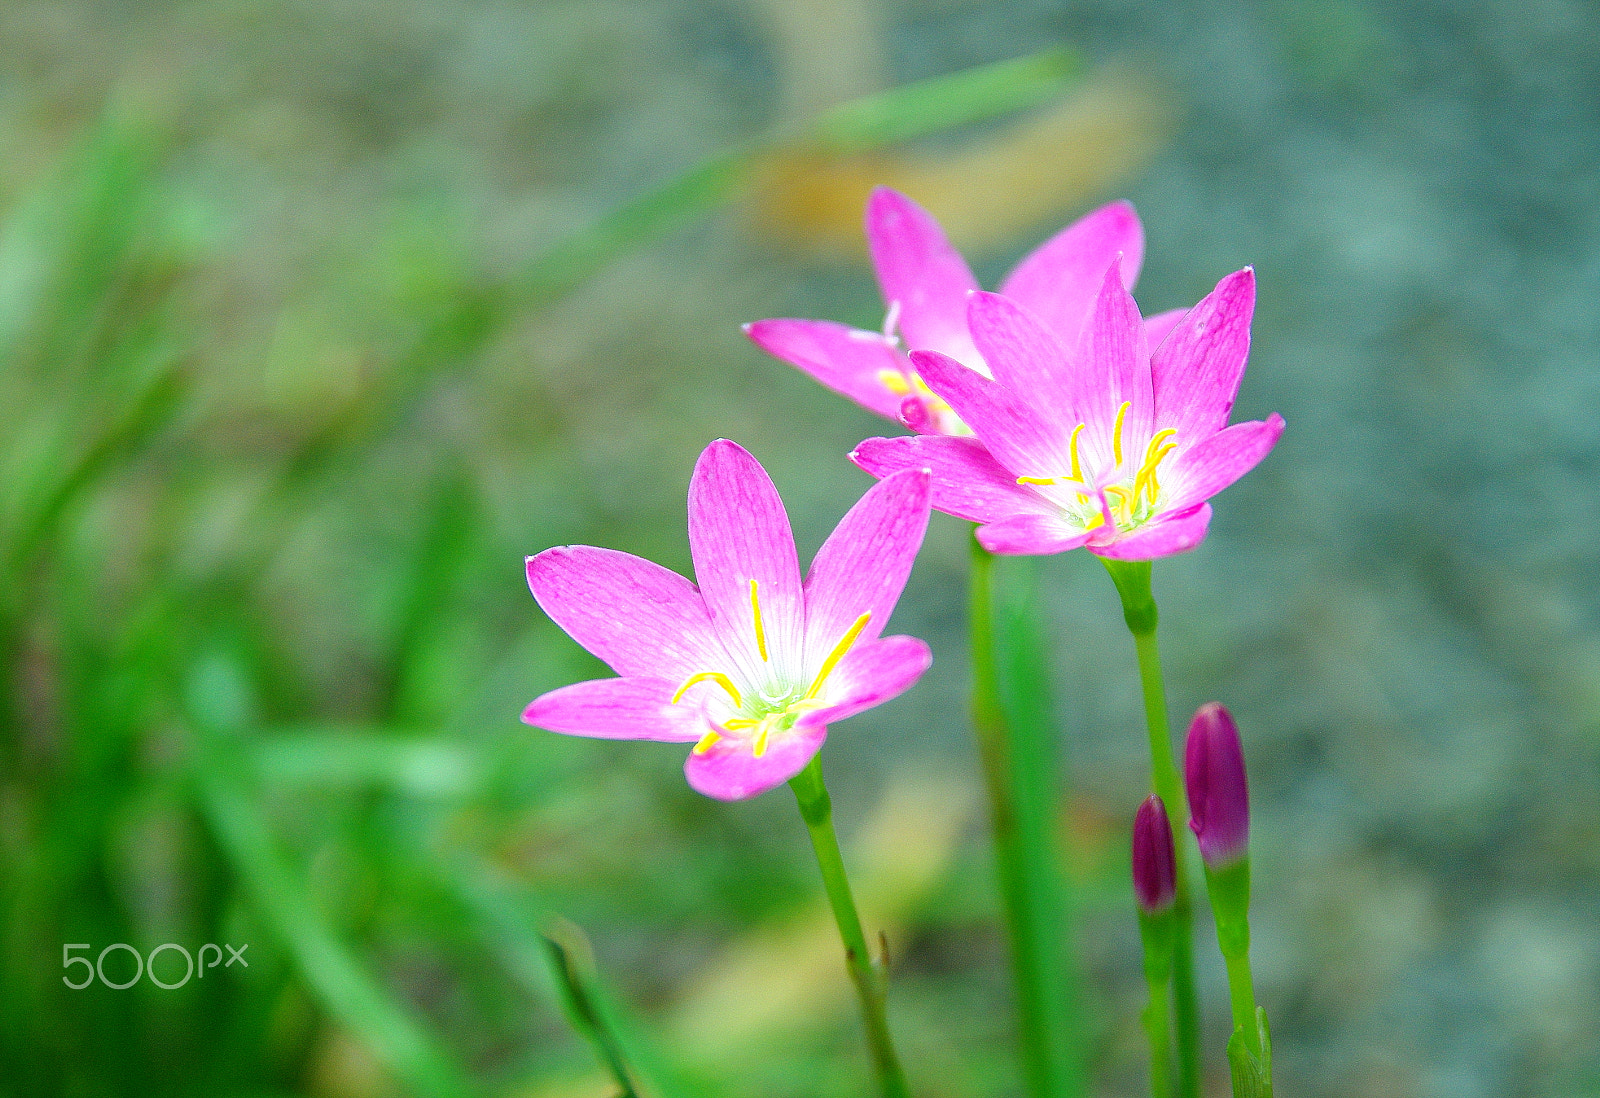 Pentax K-5 IIs + Sigma 17-50mm F2.8 EX DC HSM sample photo. Flowers of new day photography